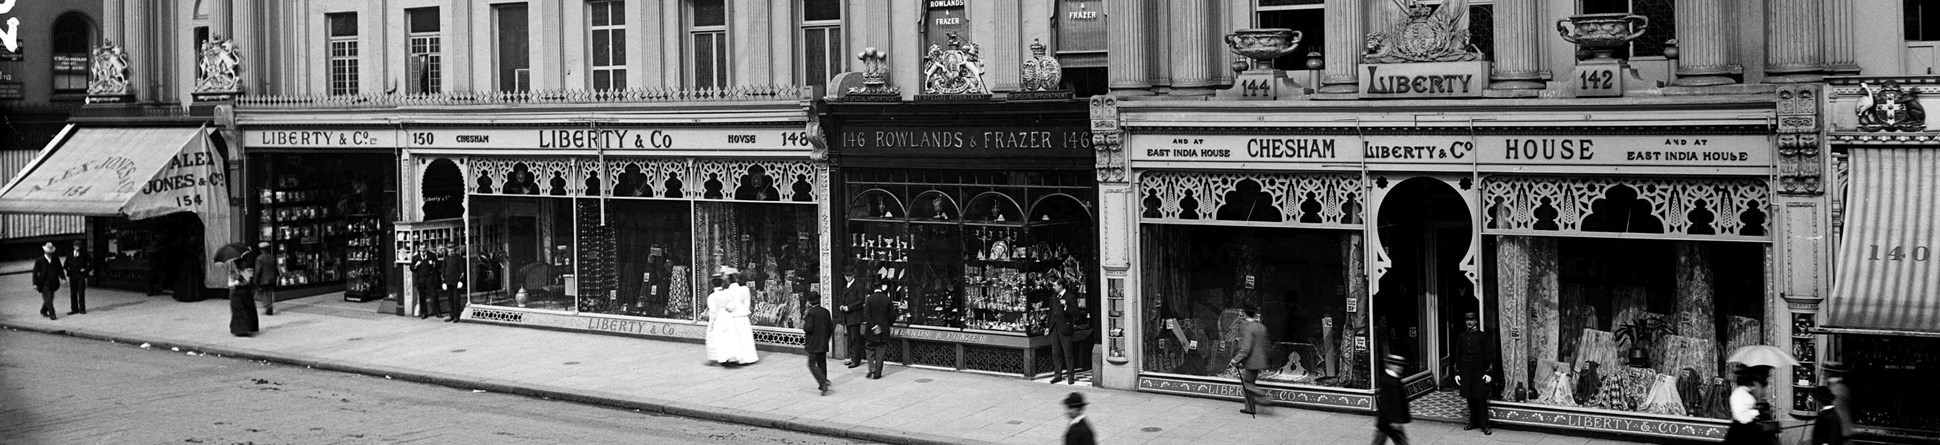 The Regent Street frontage of Chesham House, the premises of Liberty and Co and Rowlands and Frazer, London, 25 August 1898.